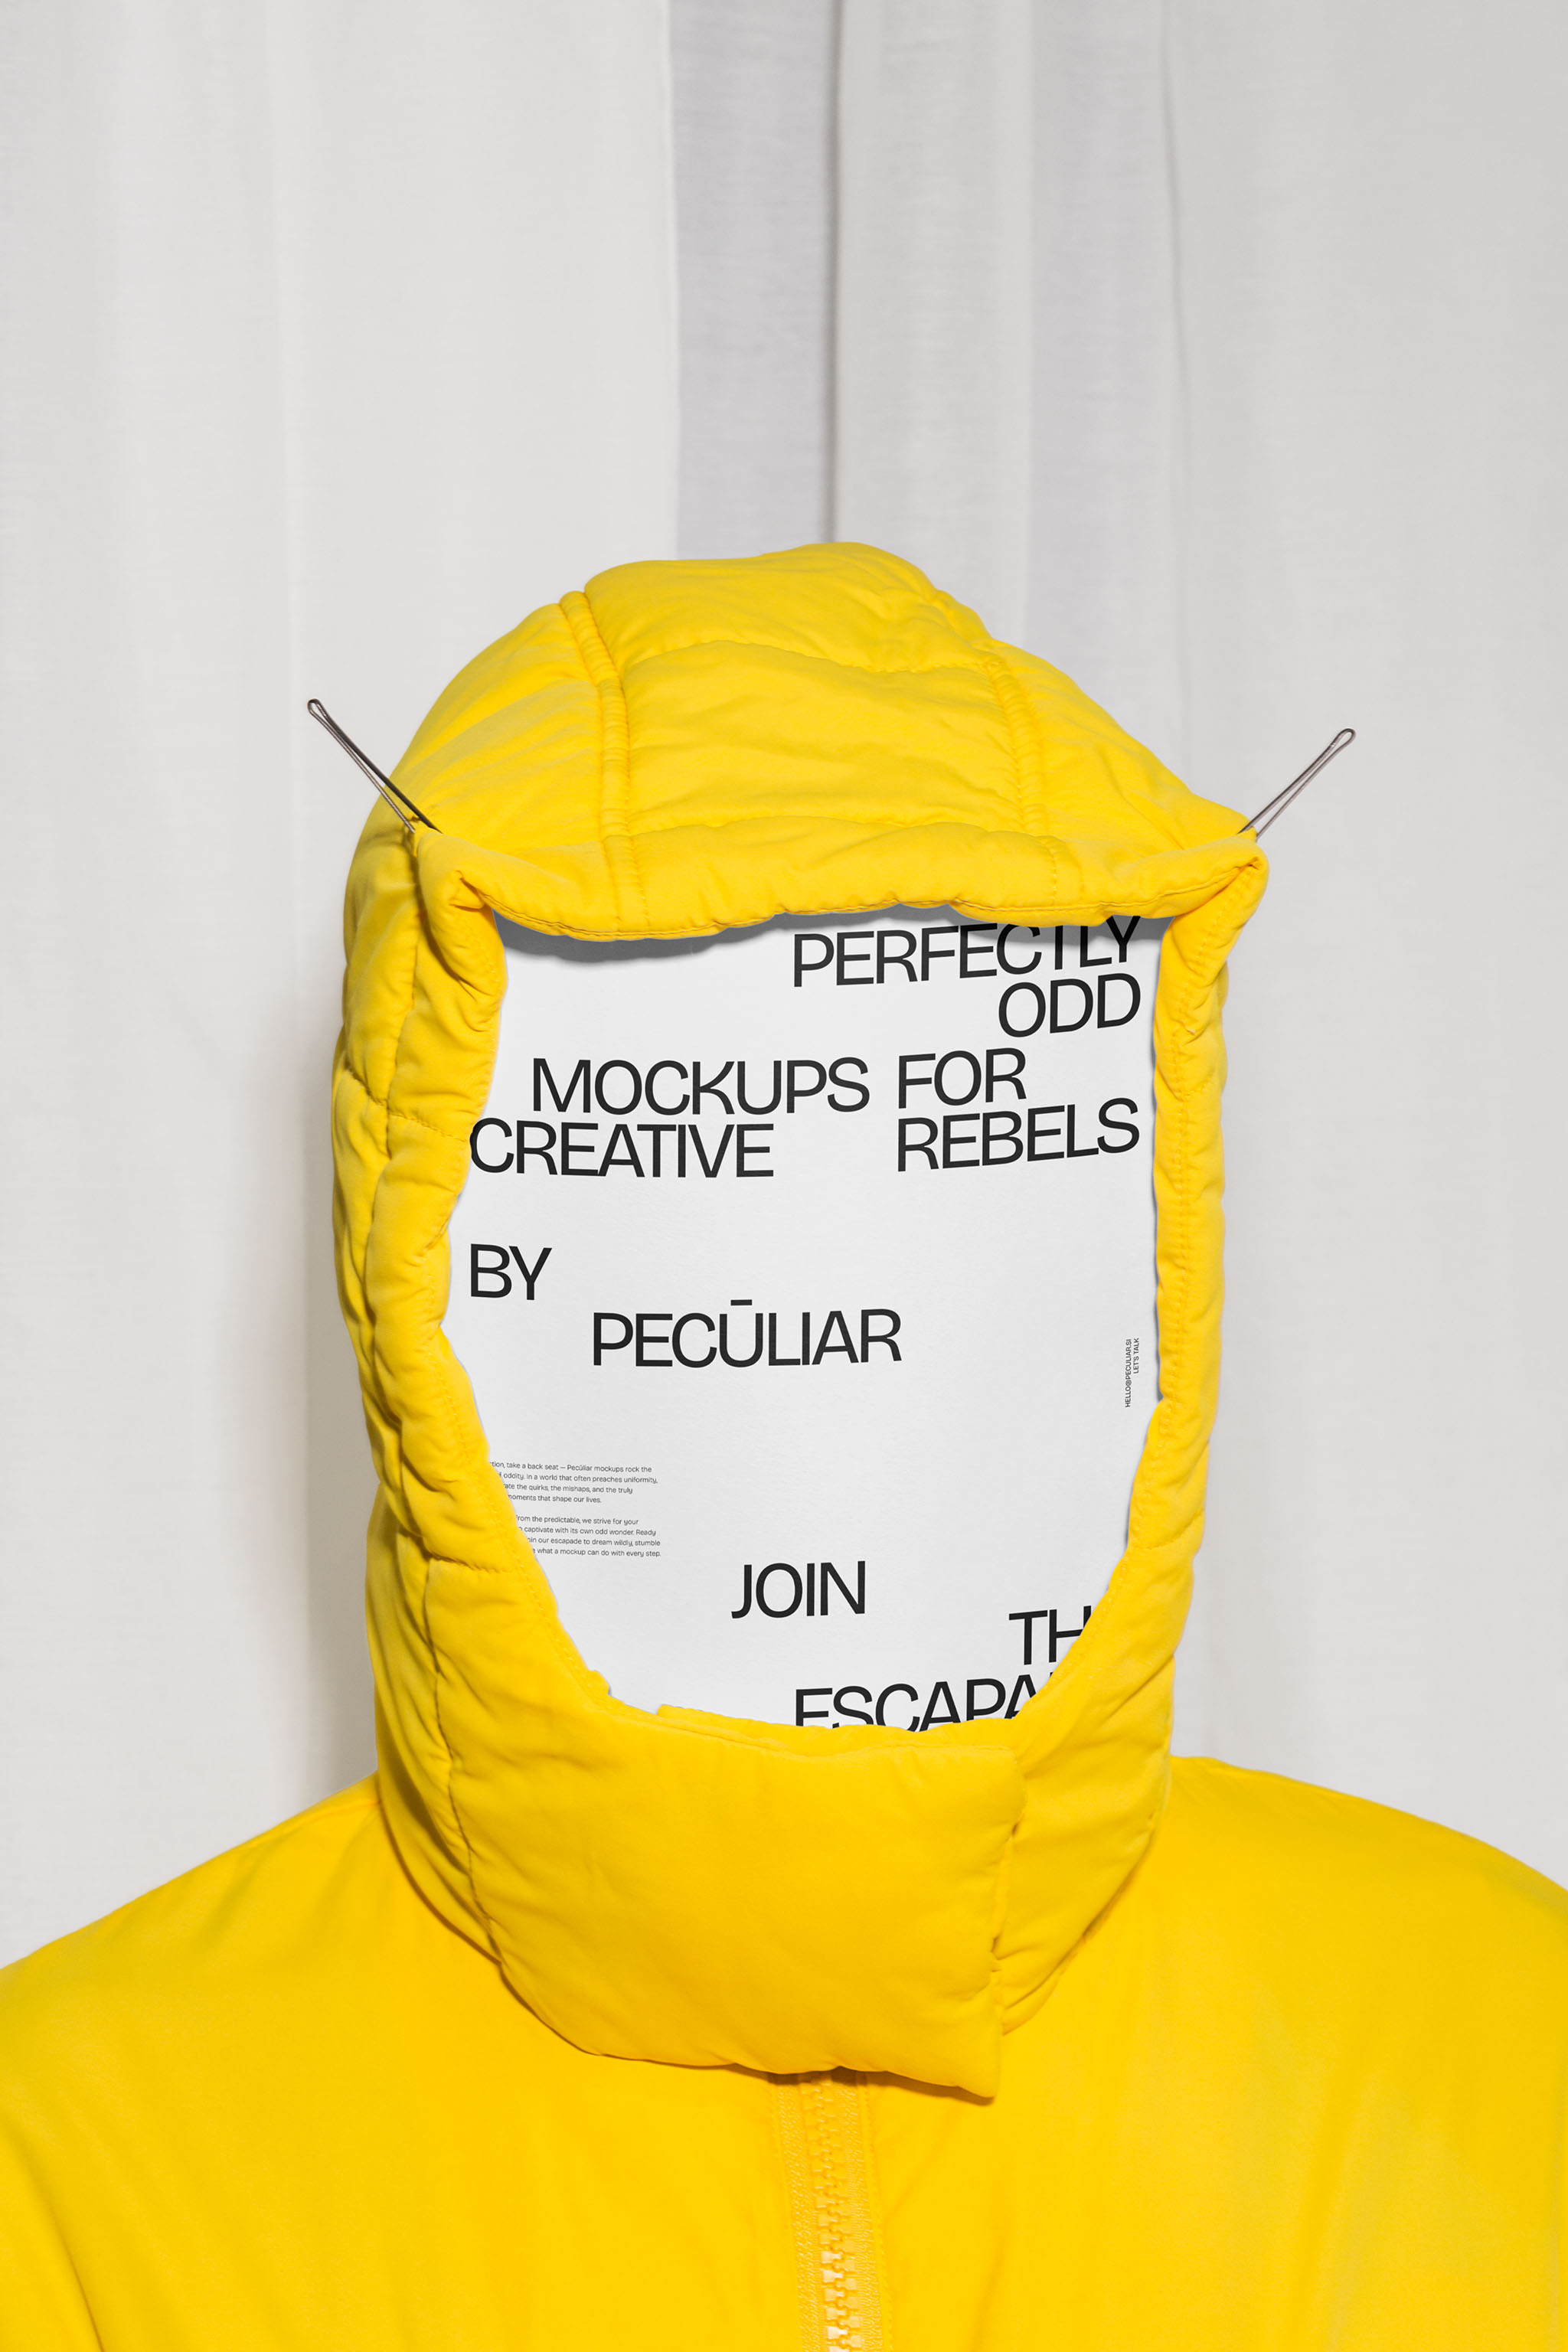 Close-up of an A5 minimalist design poster mockup hiding the face of a person in a puffer jacket against a light background, in use example.